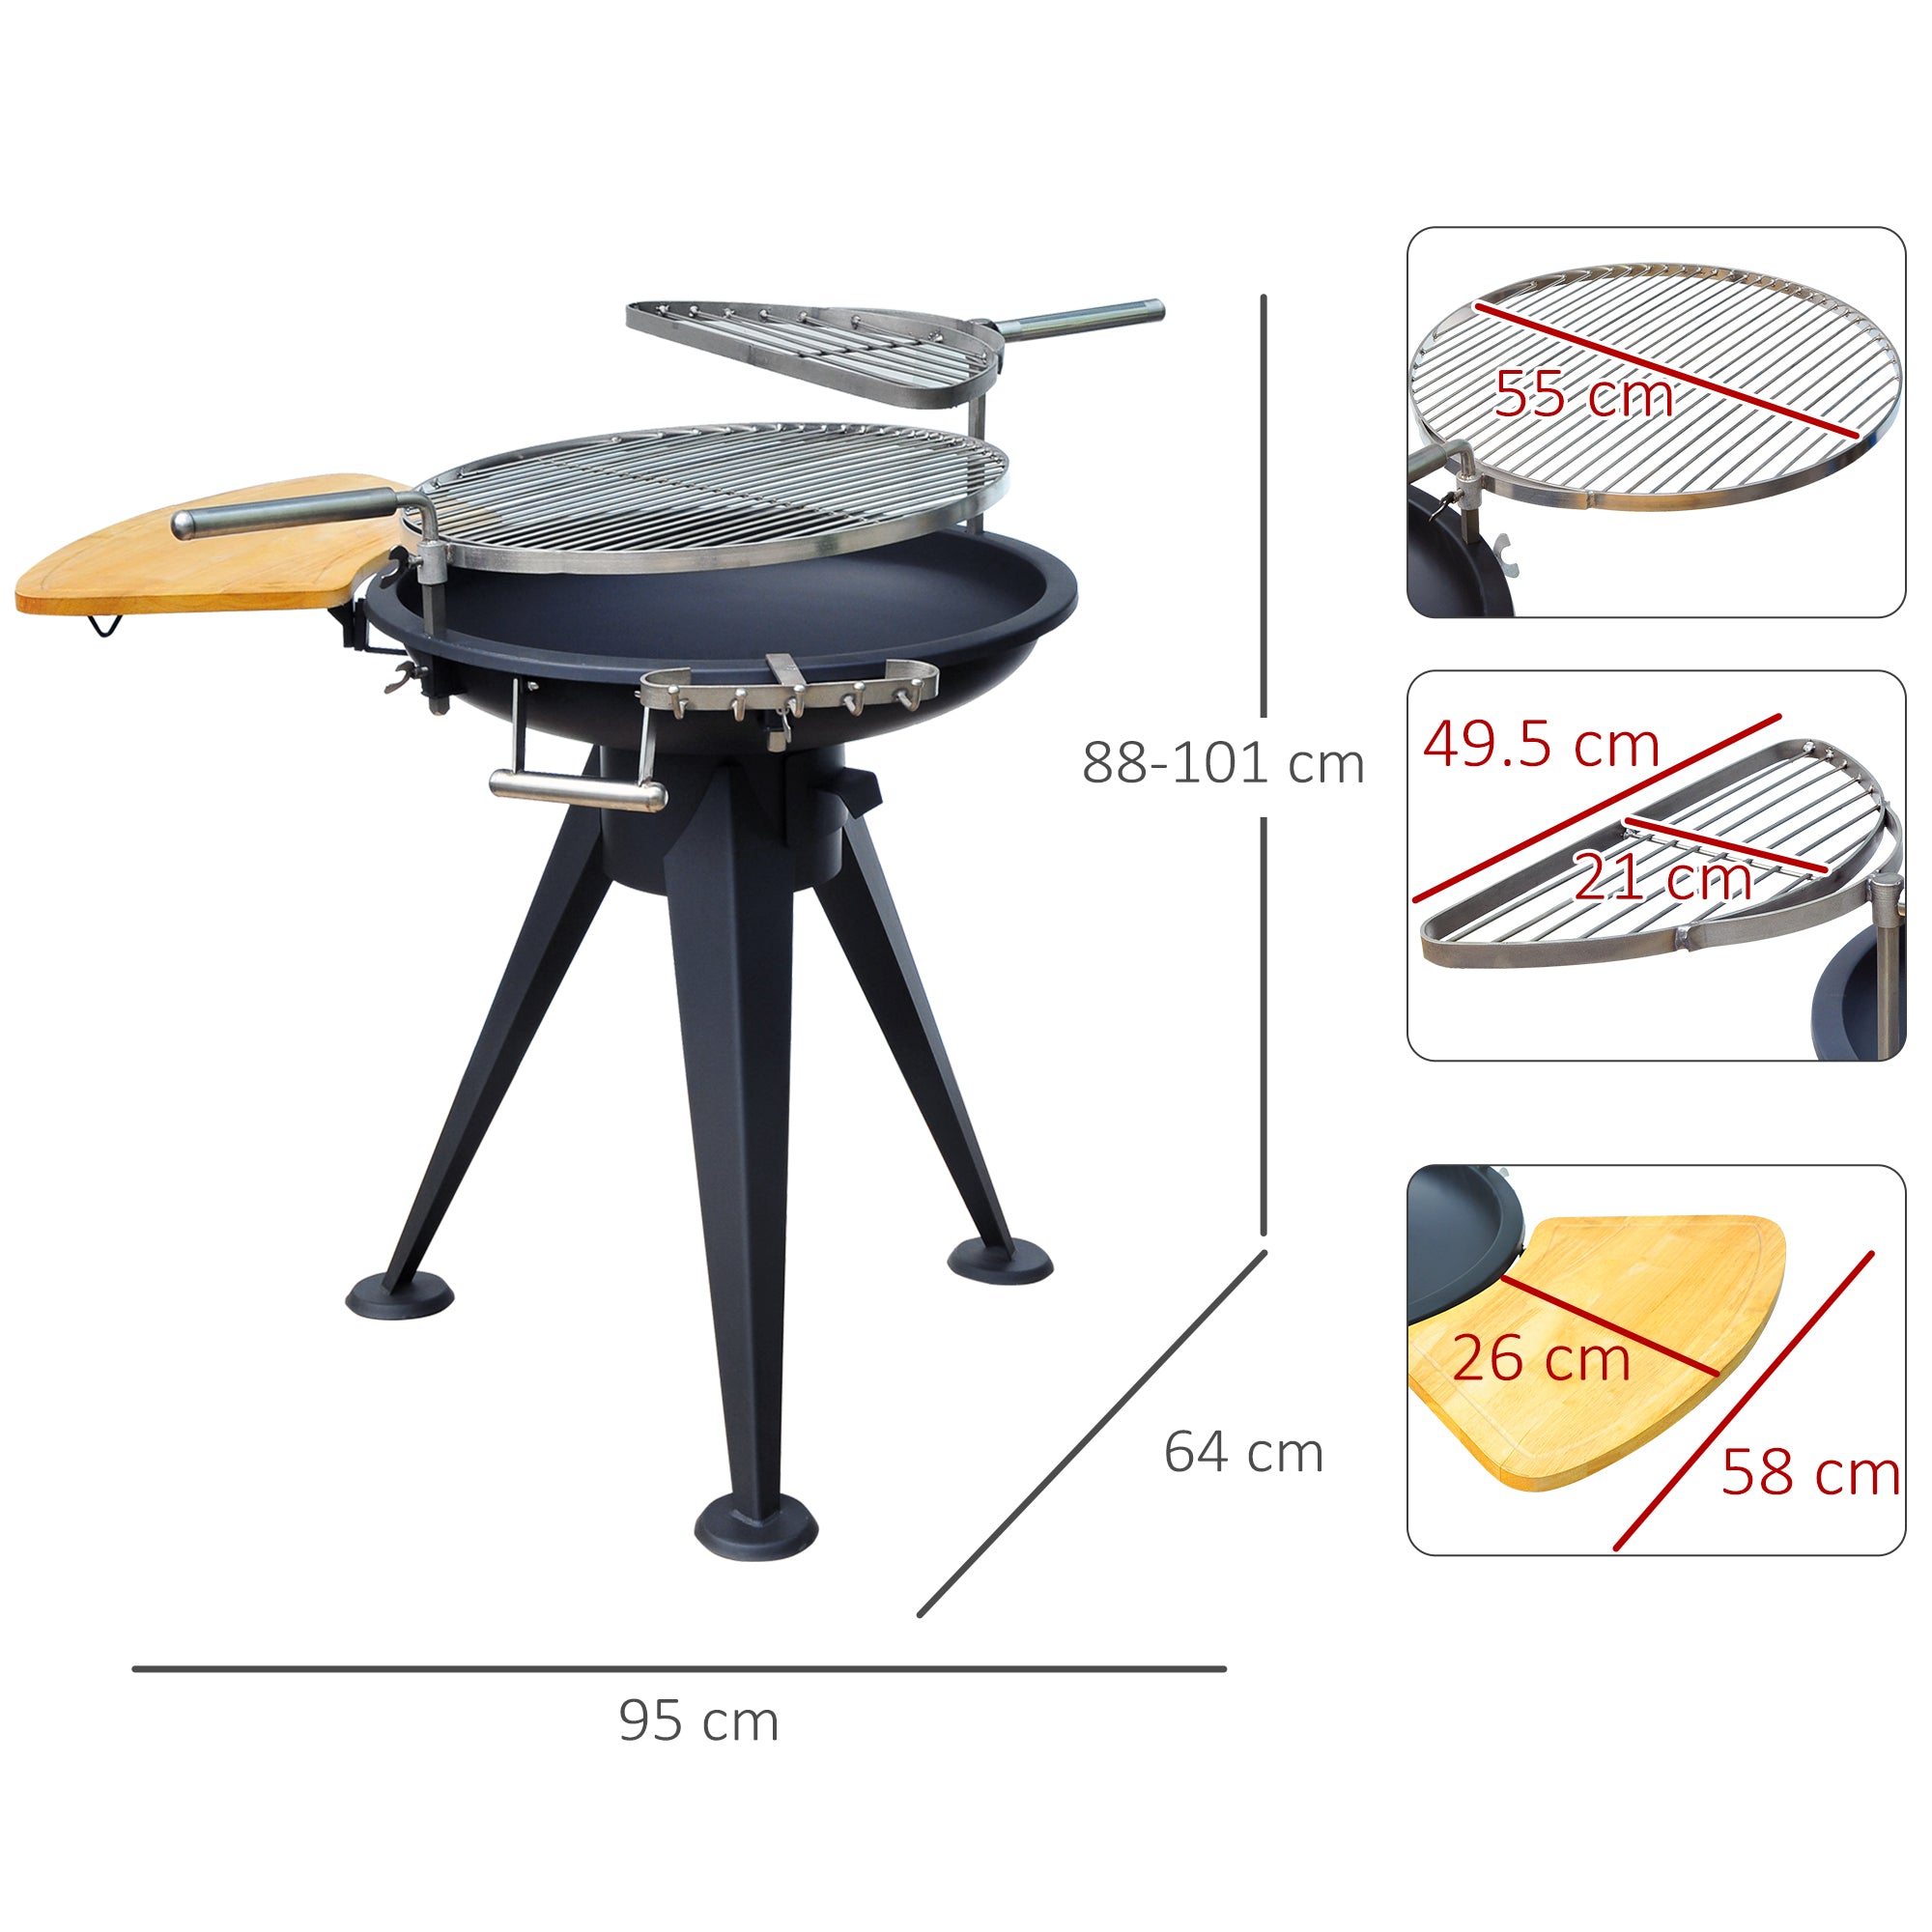 Outsunny Charcoal BBQ Outdoor Garden Adjustable Barbecue Double Grill Party Cooking Fire Pit with Cutting Board - Black